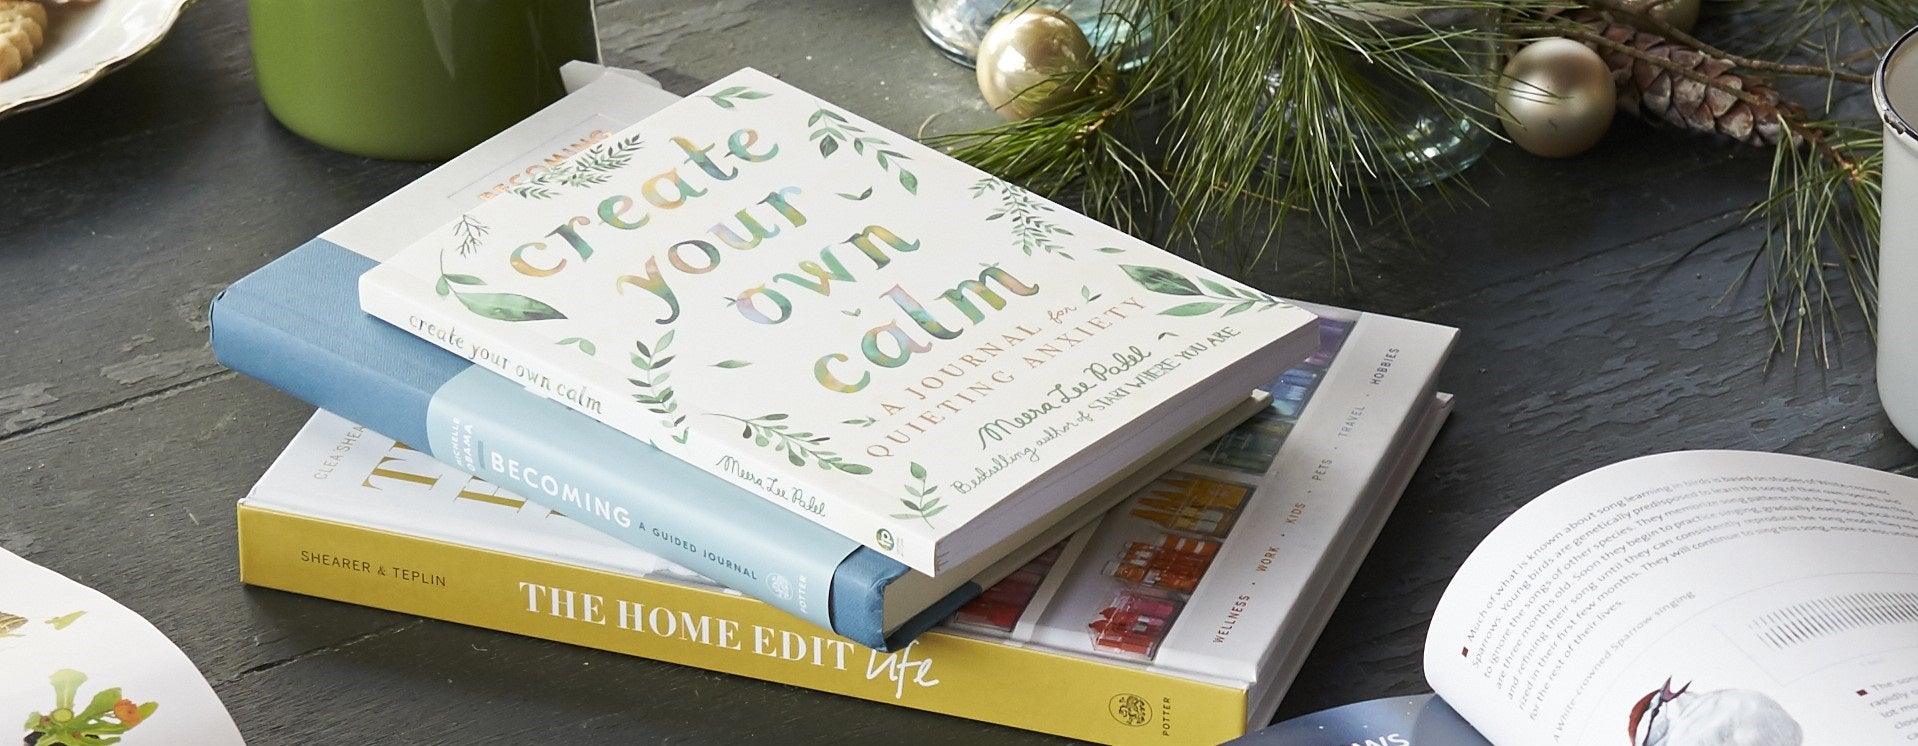 Your Holiday Gift Giving Guide is Here! The Best Biographies and Gift Books